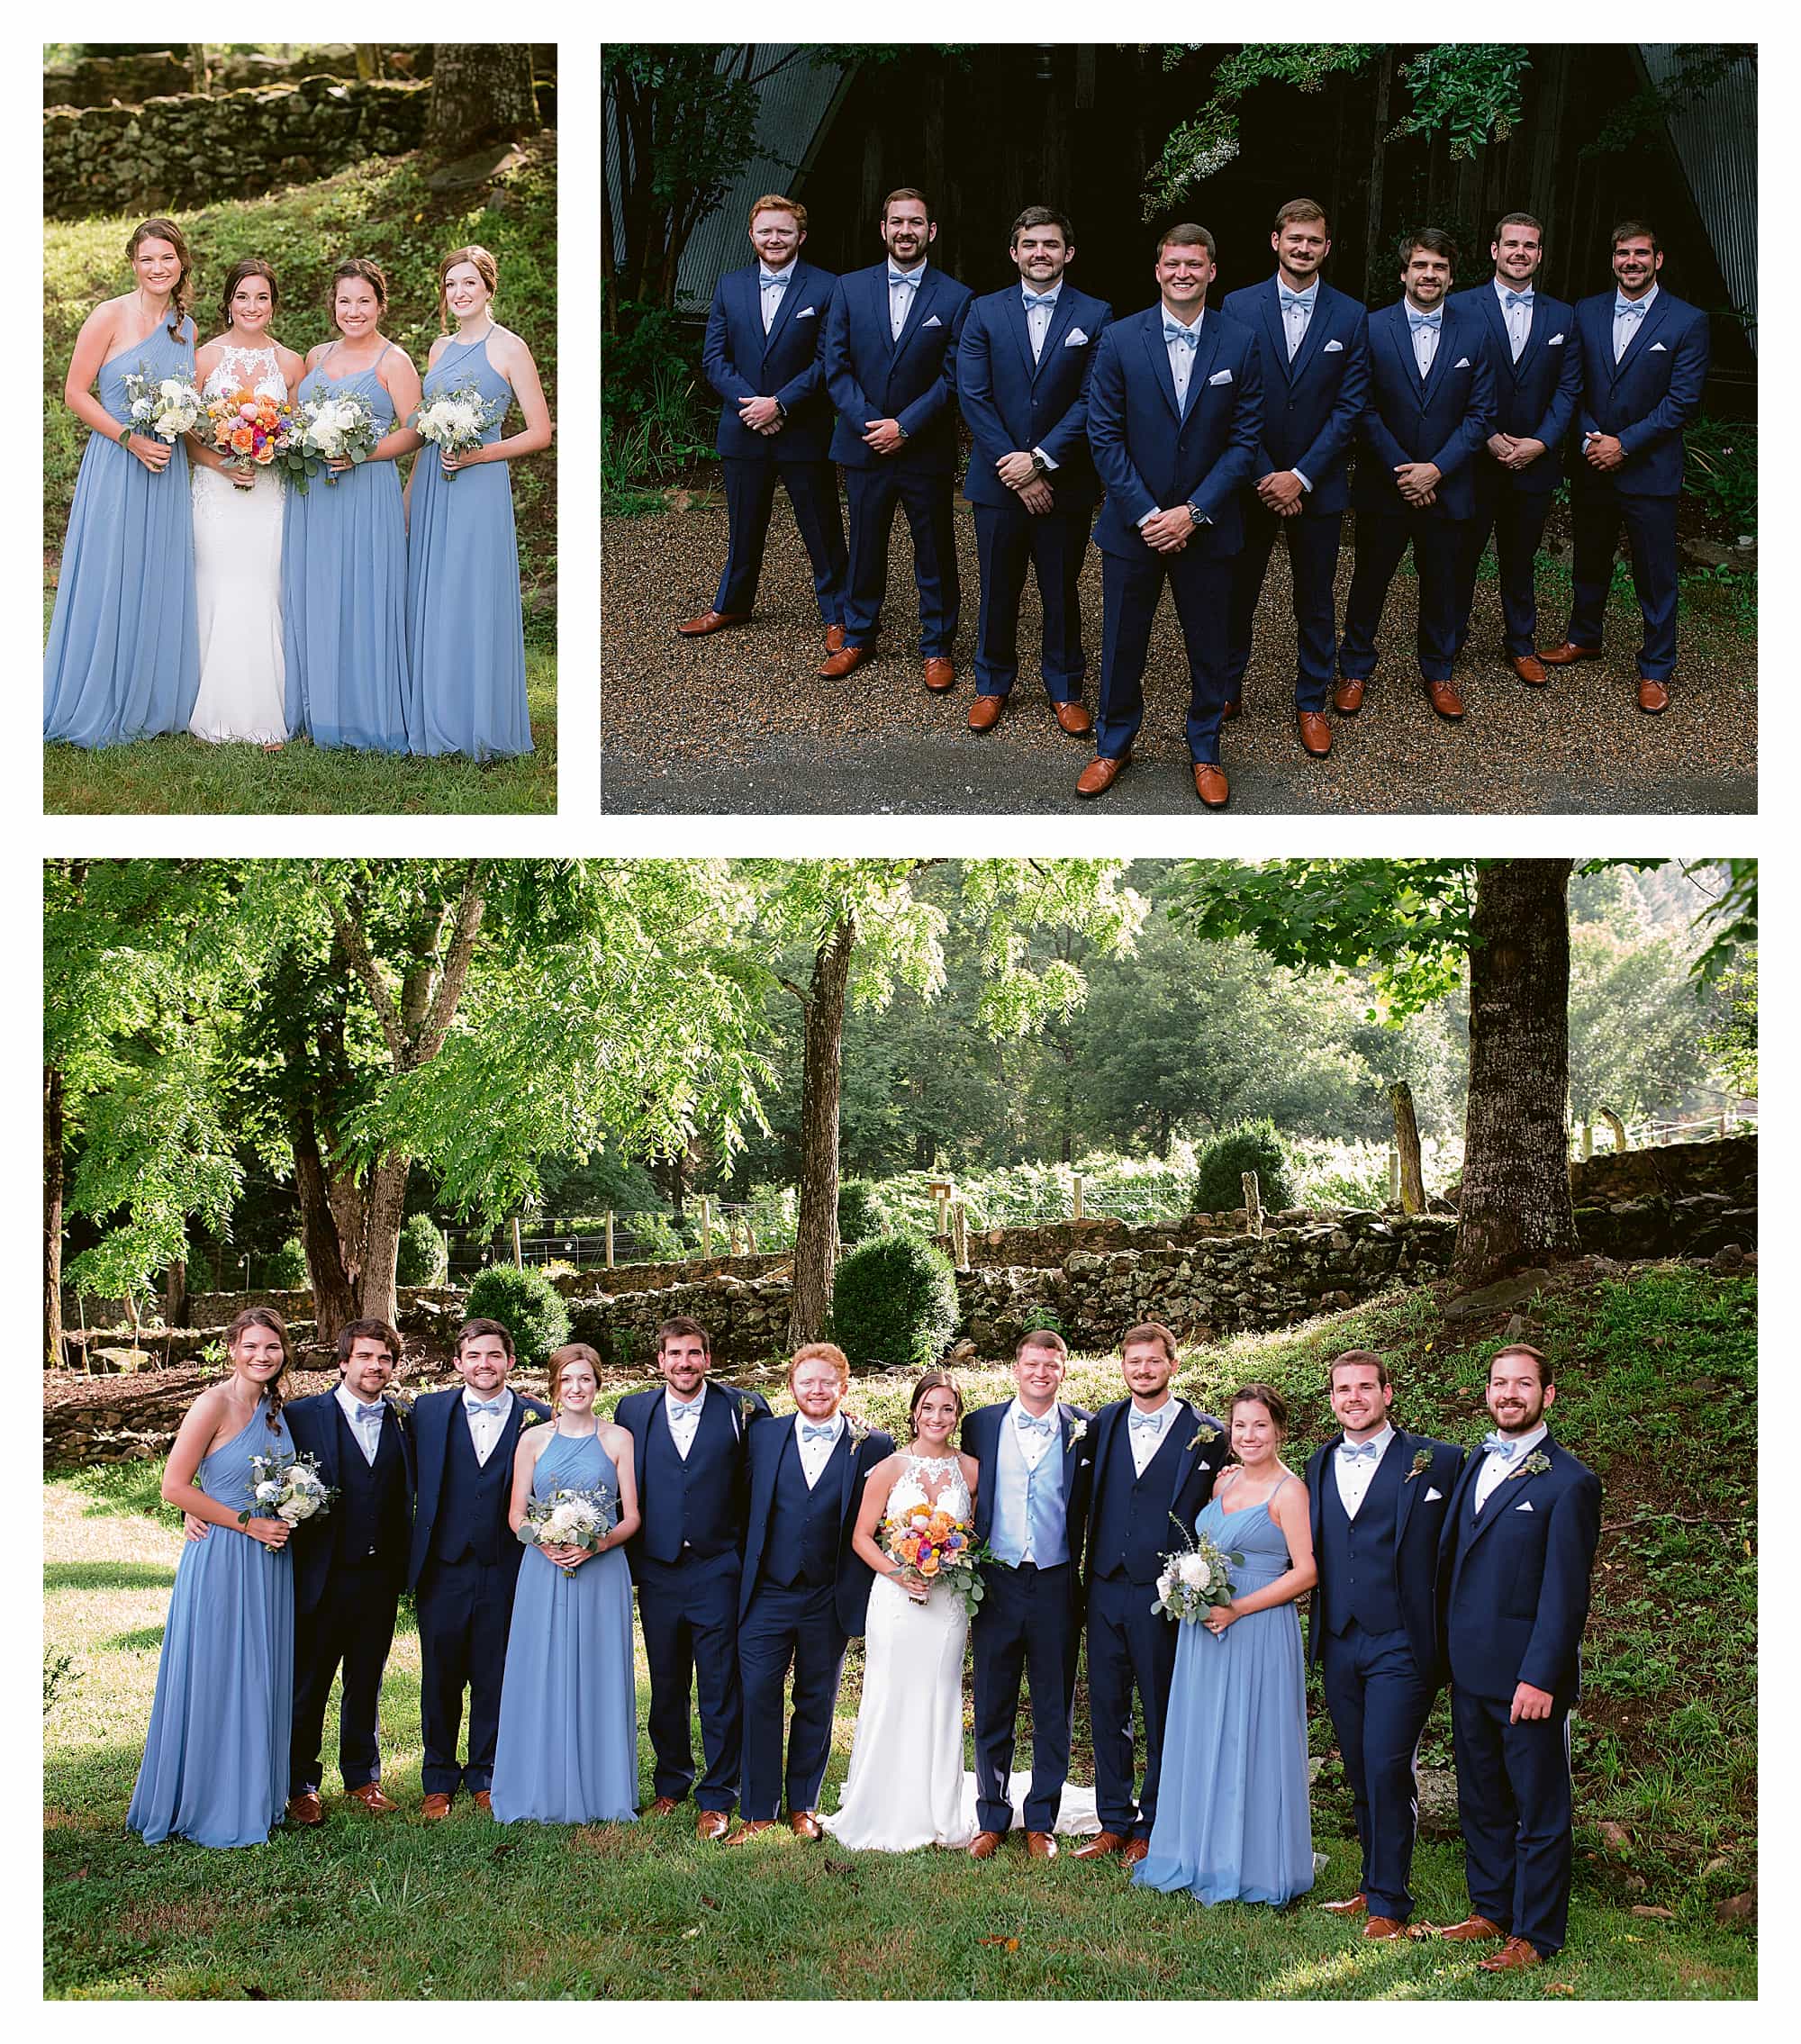 Wedding party standing outside posing in navy blue suits and light blue bridesmaid dresses